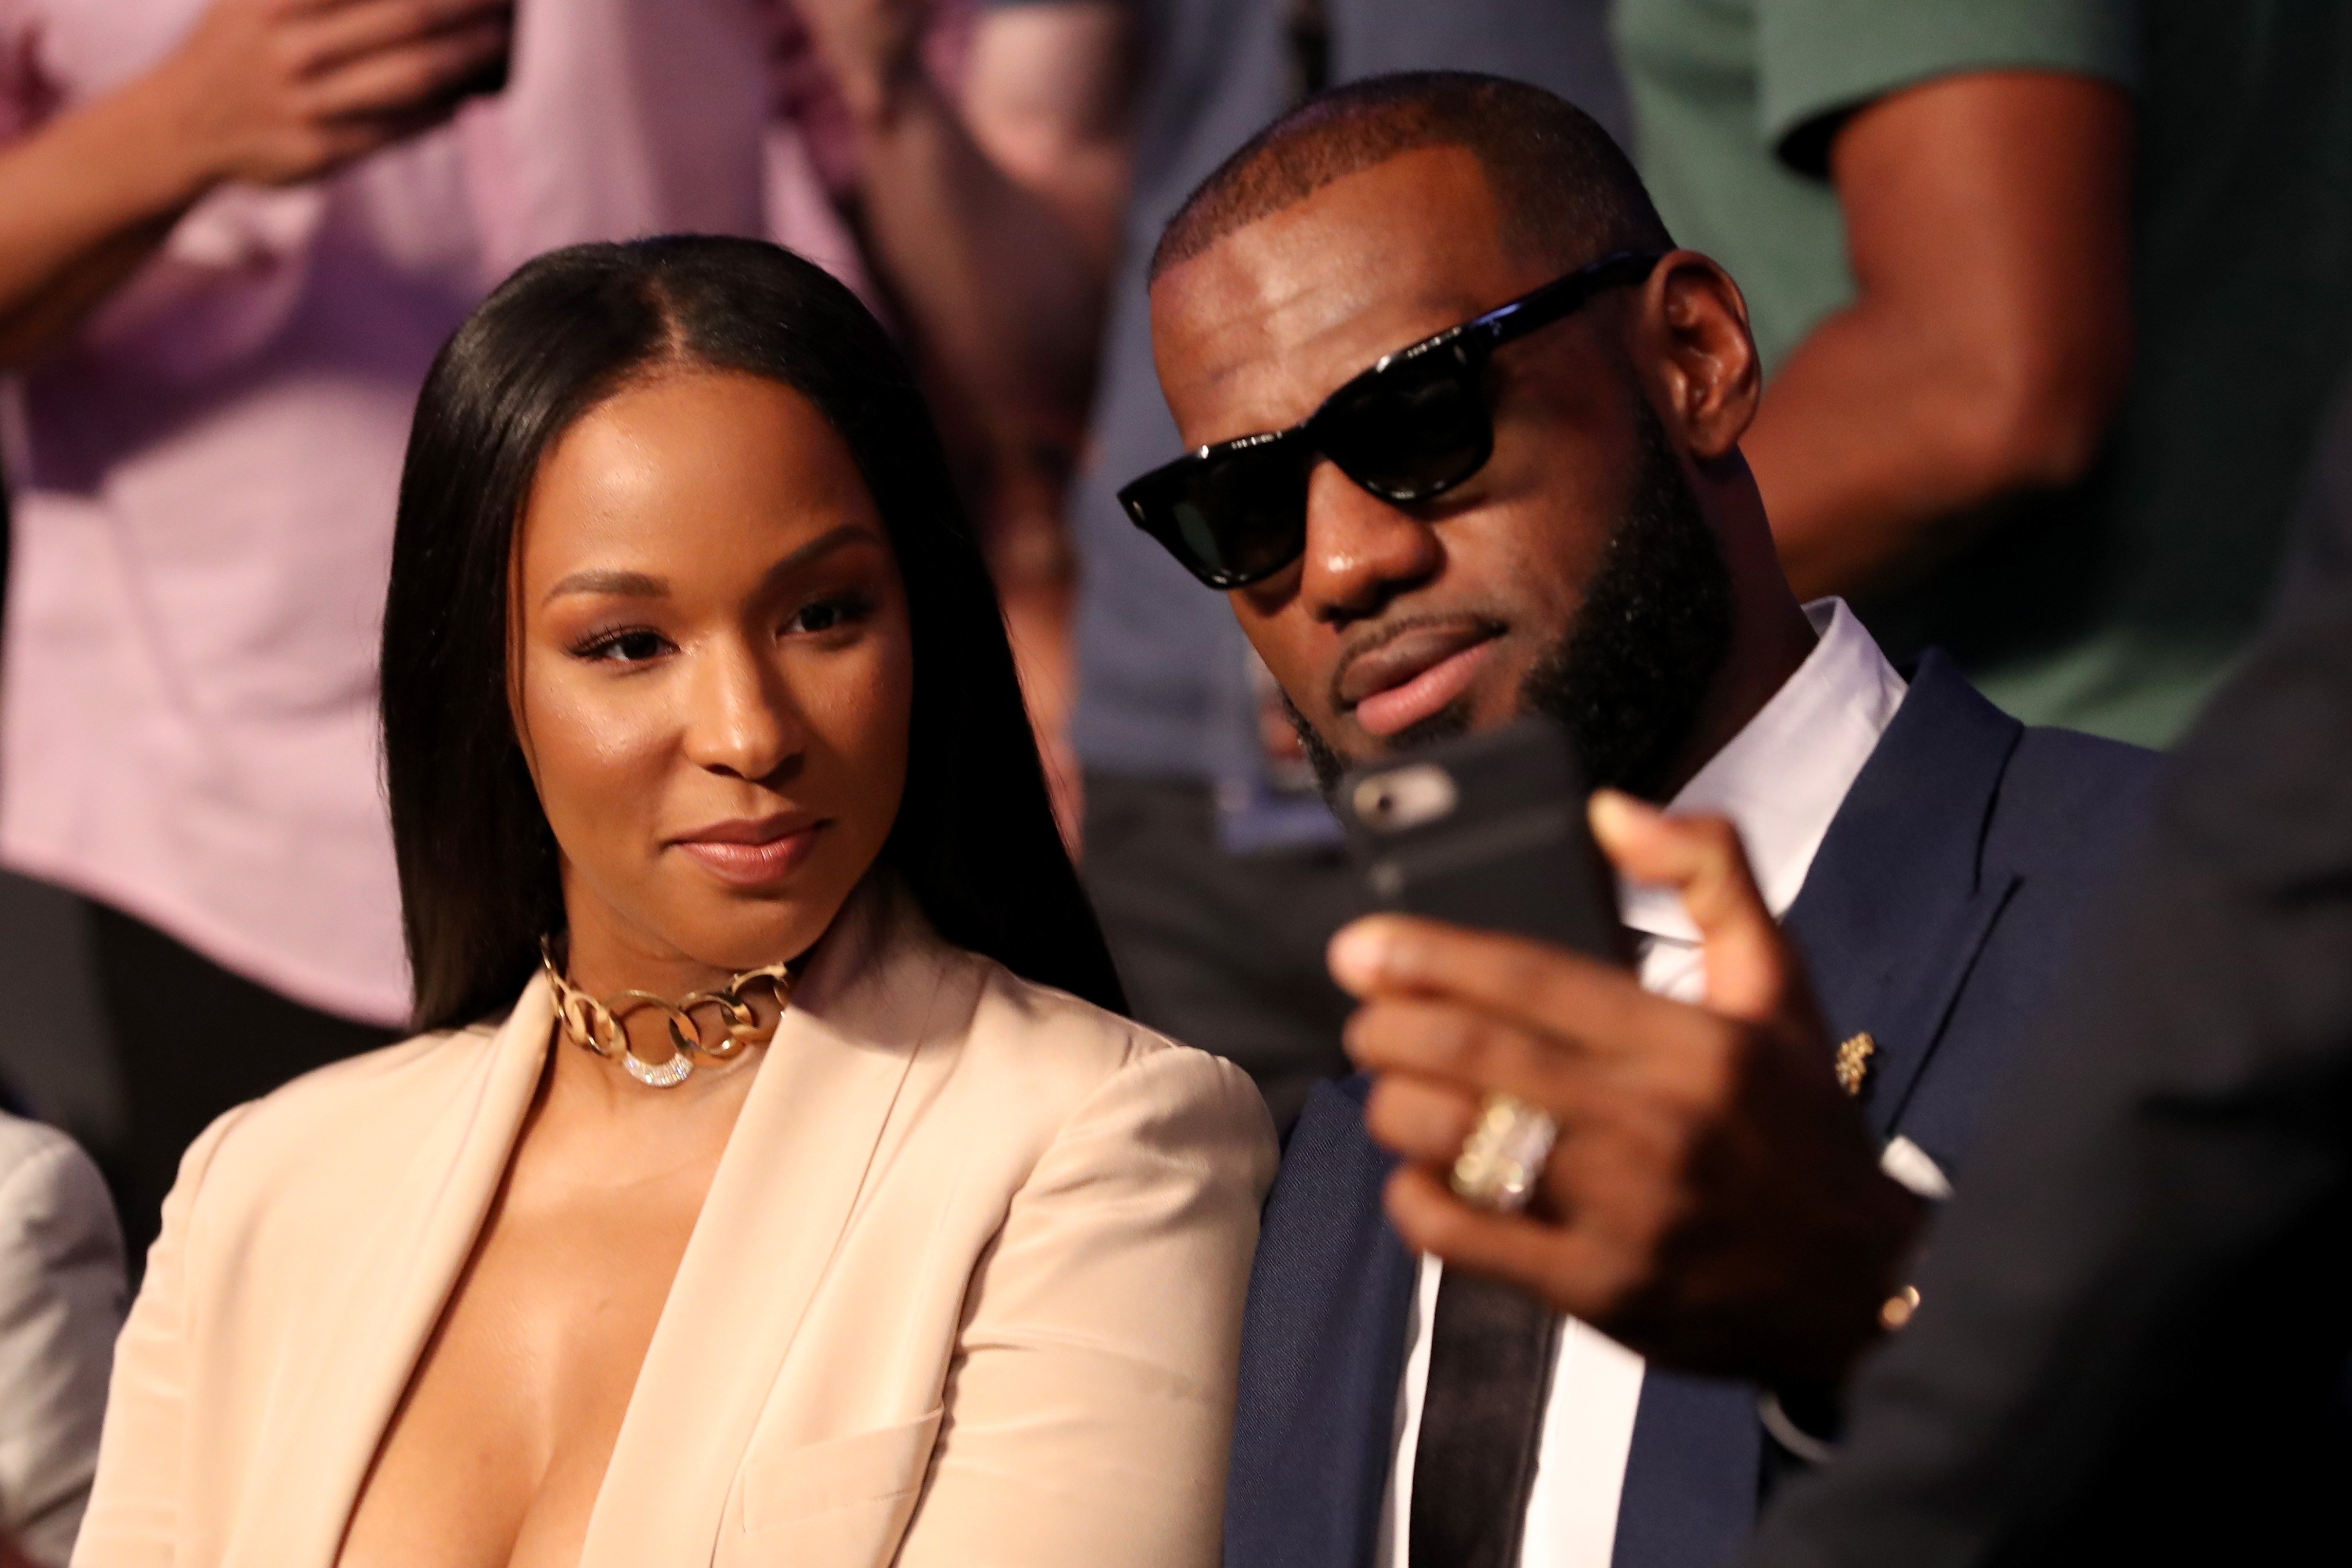 LeBron & Savannah James at the boxing match between Floyd Mayweather Jr. & Conor McGregor on Aug. 26, 2017 in Las Vegas | Photo: Getty Images